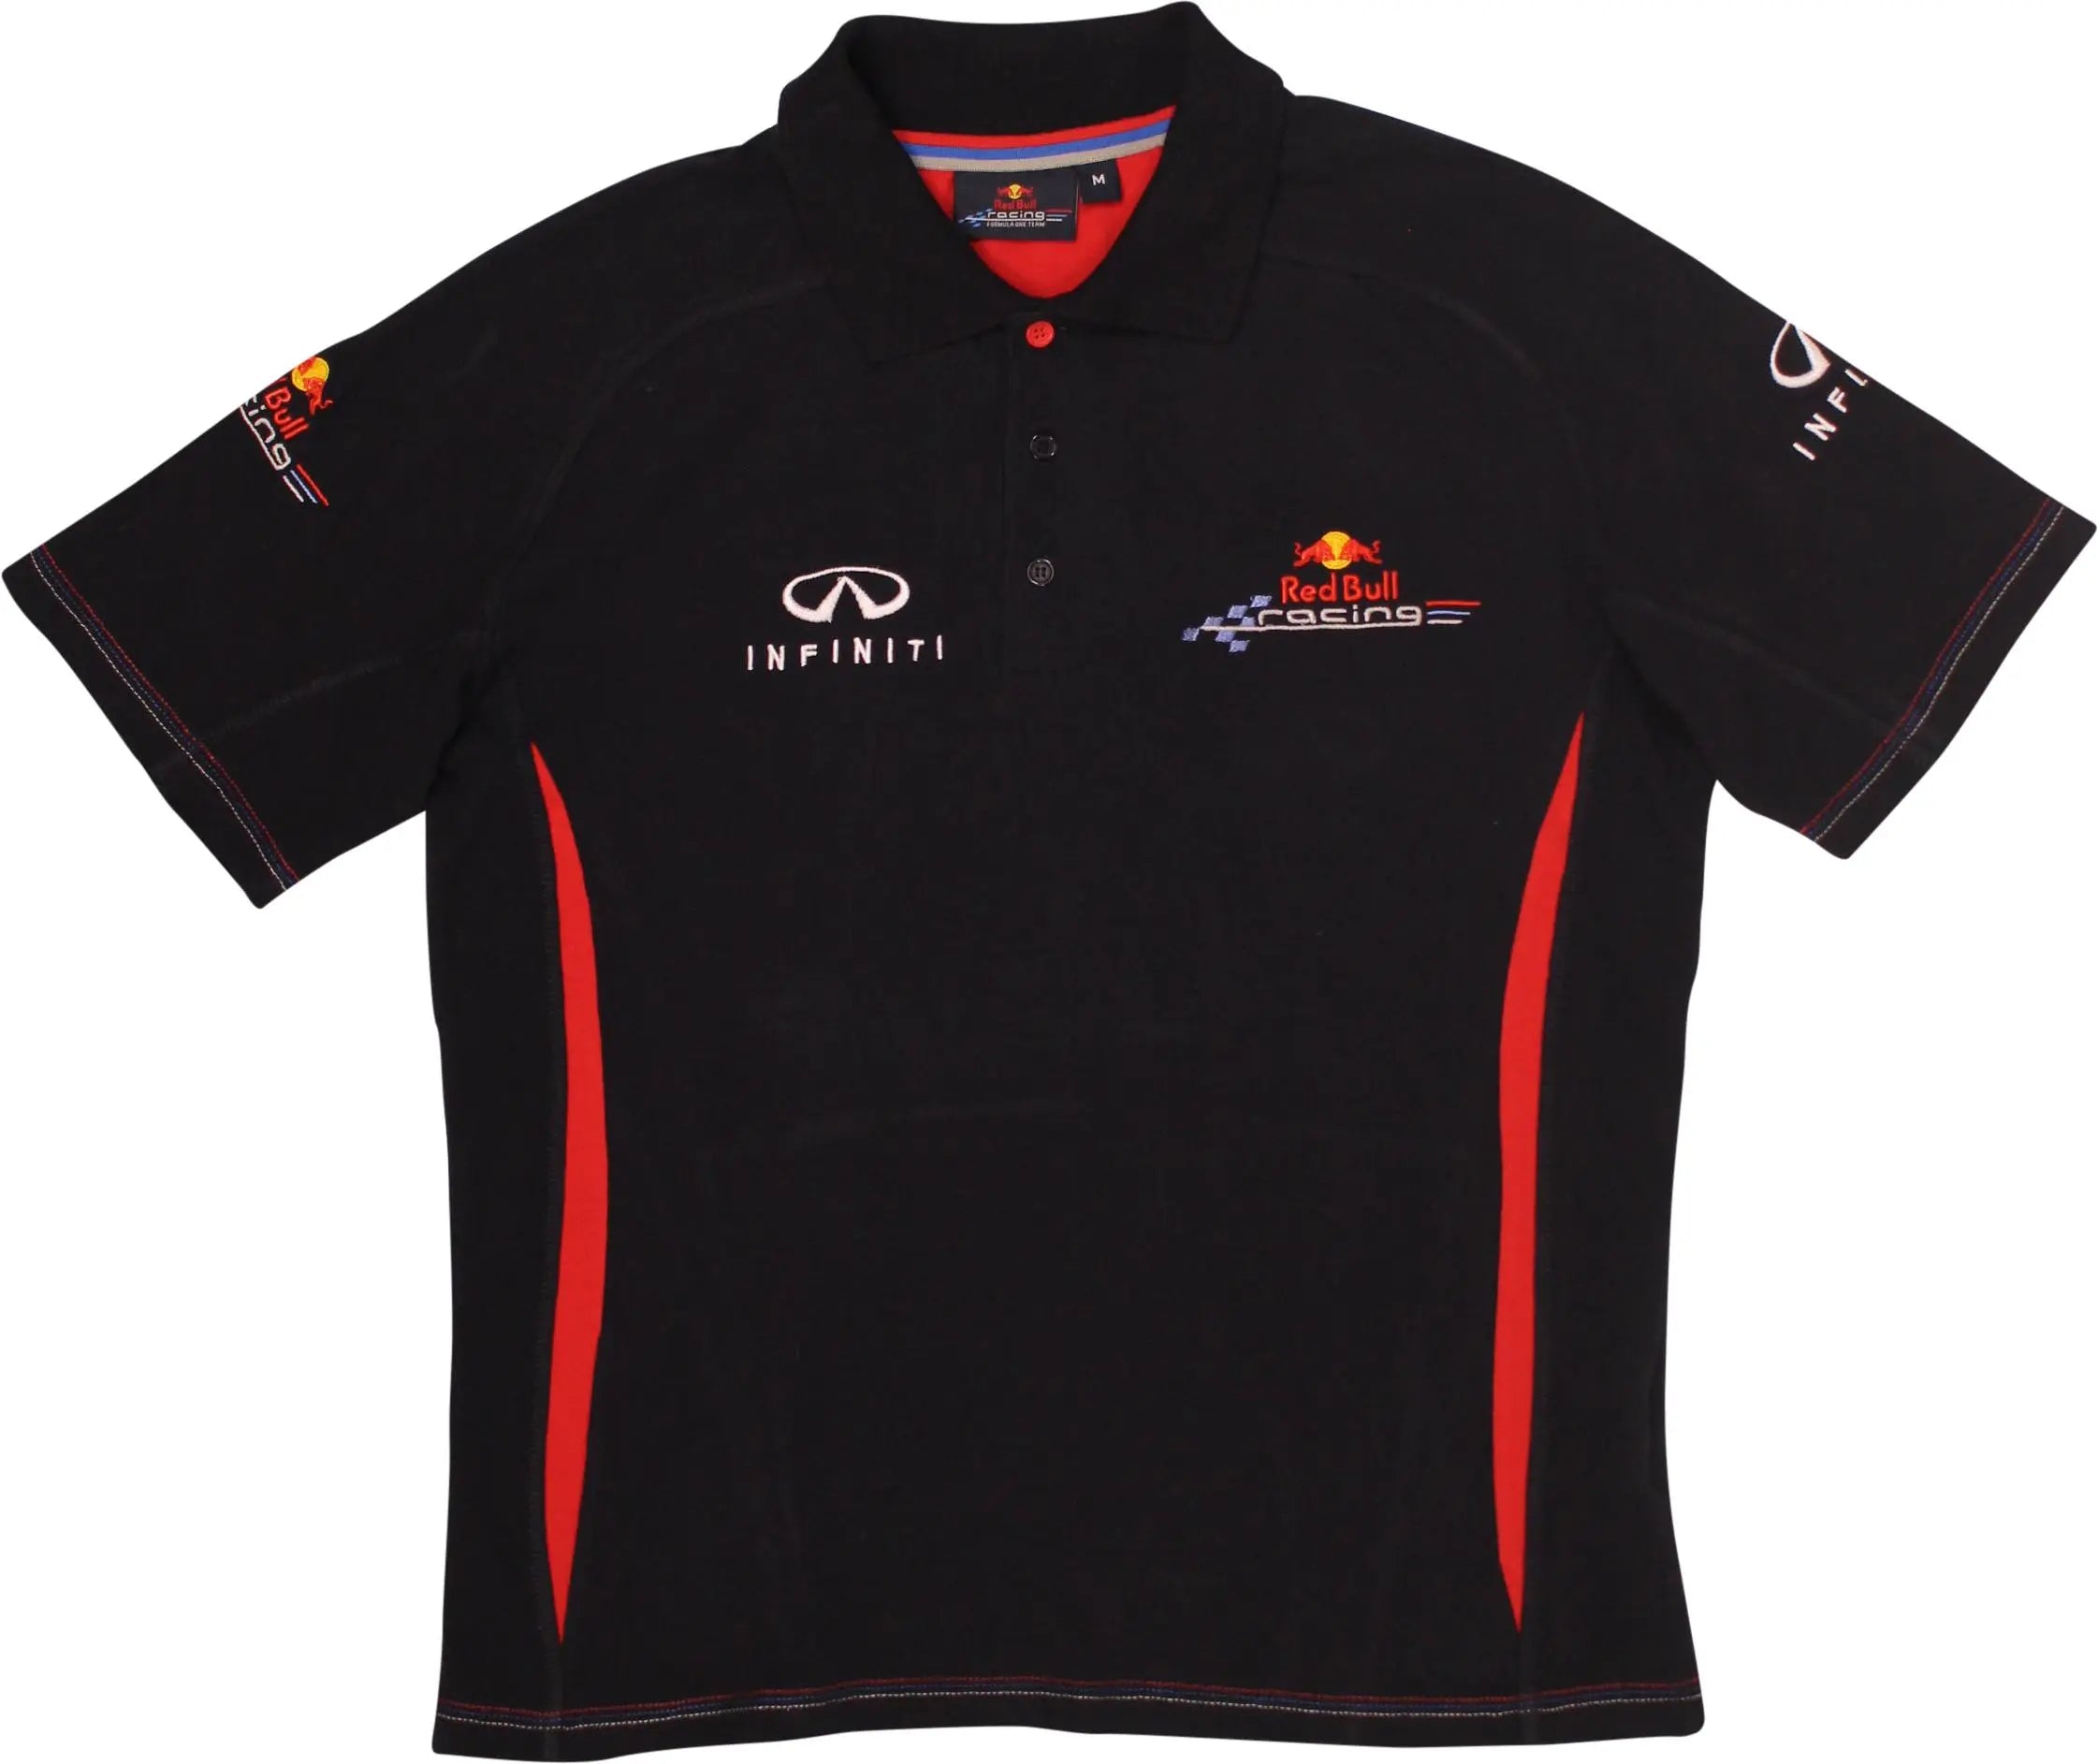 Red Bull Racing - Red Bull Racing Polo Shirt- ThriftTale.com - Vintage and second handclothing